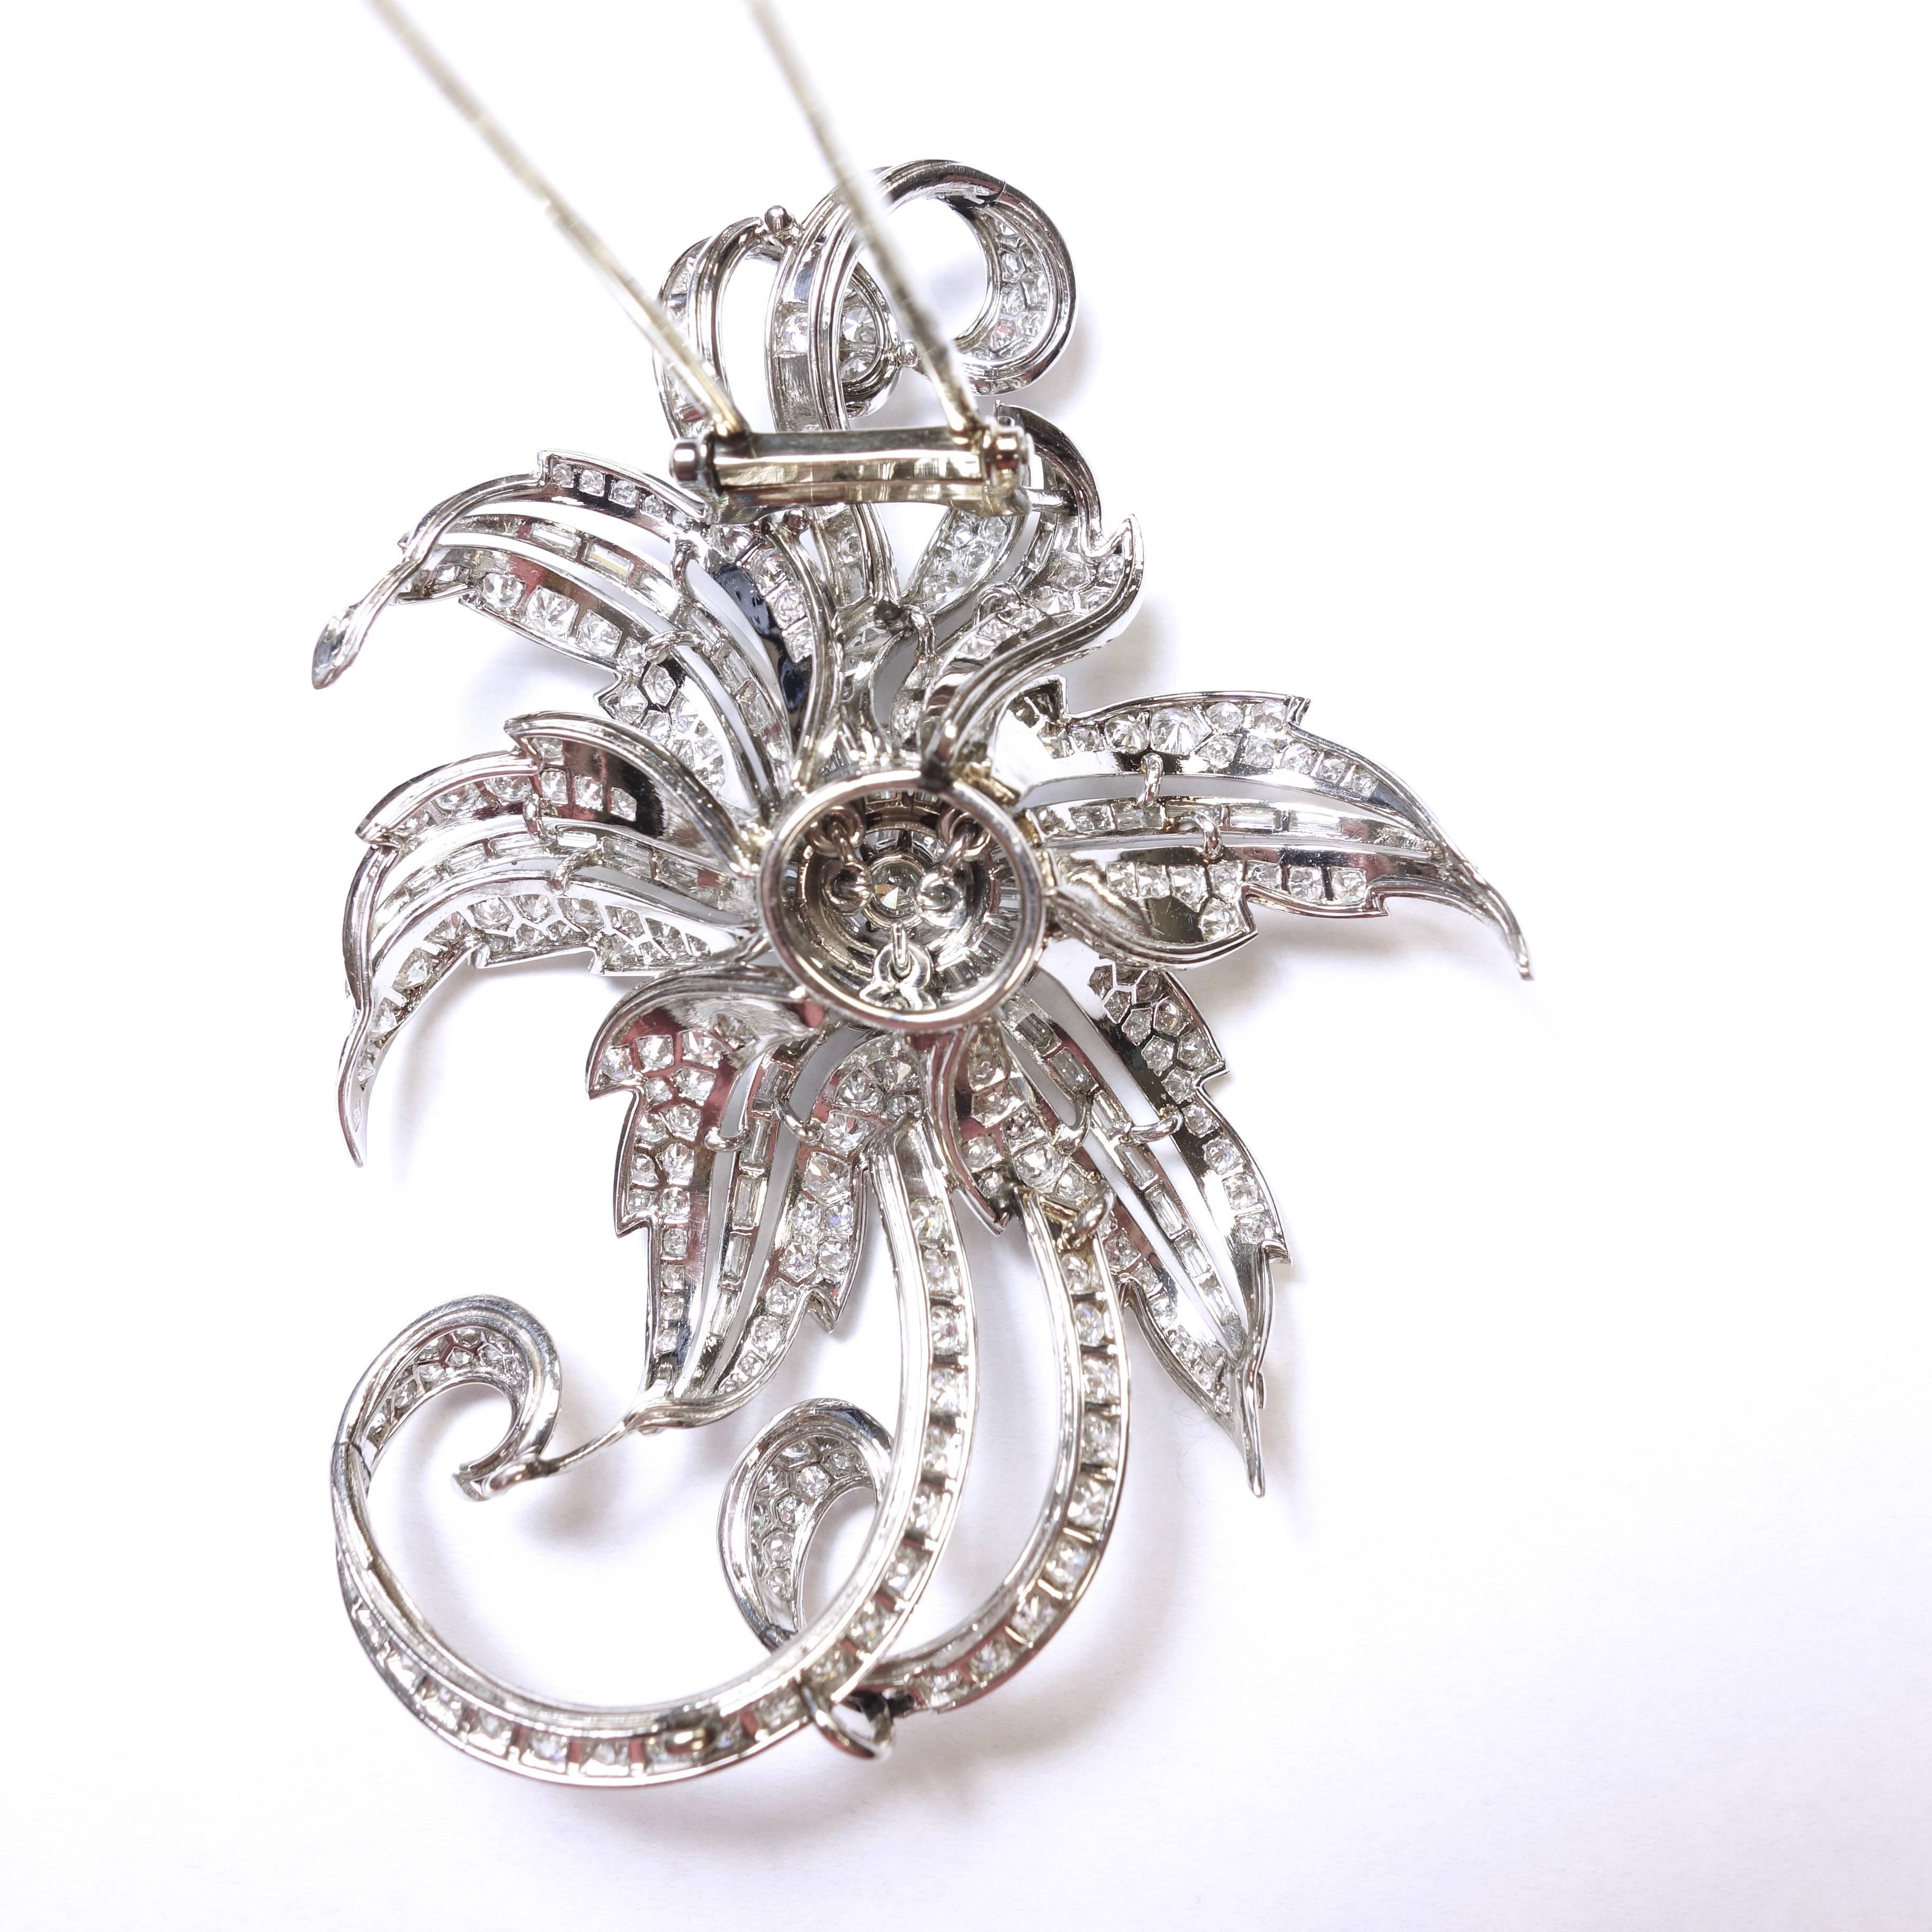 Amazing vintage French Platinum flower brooch covered with diamonds. 
Approximate total diamond weight: 10.0ct. Color: F-G, Clarity: VS1-SI1. 
The center stone is an approximately 0.80ct round brilliant cut diamond. 
Color: F, Clarity: SI-1.